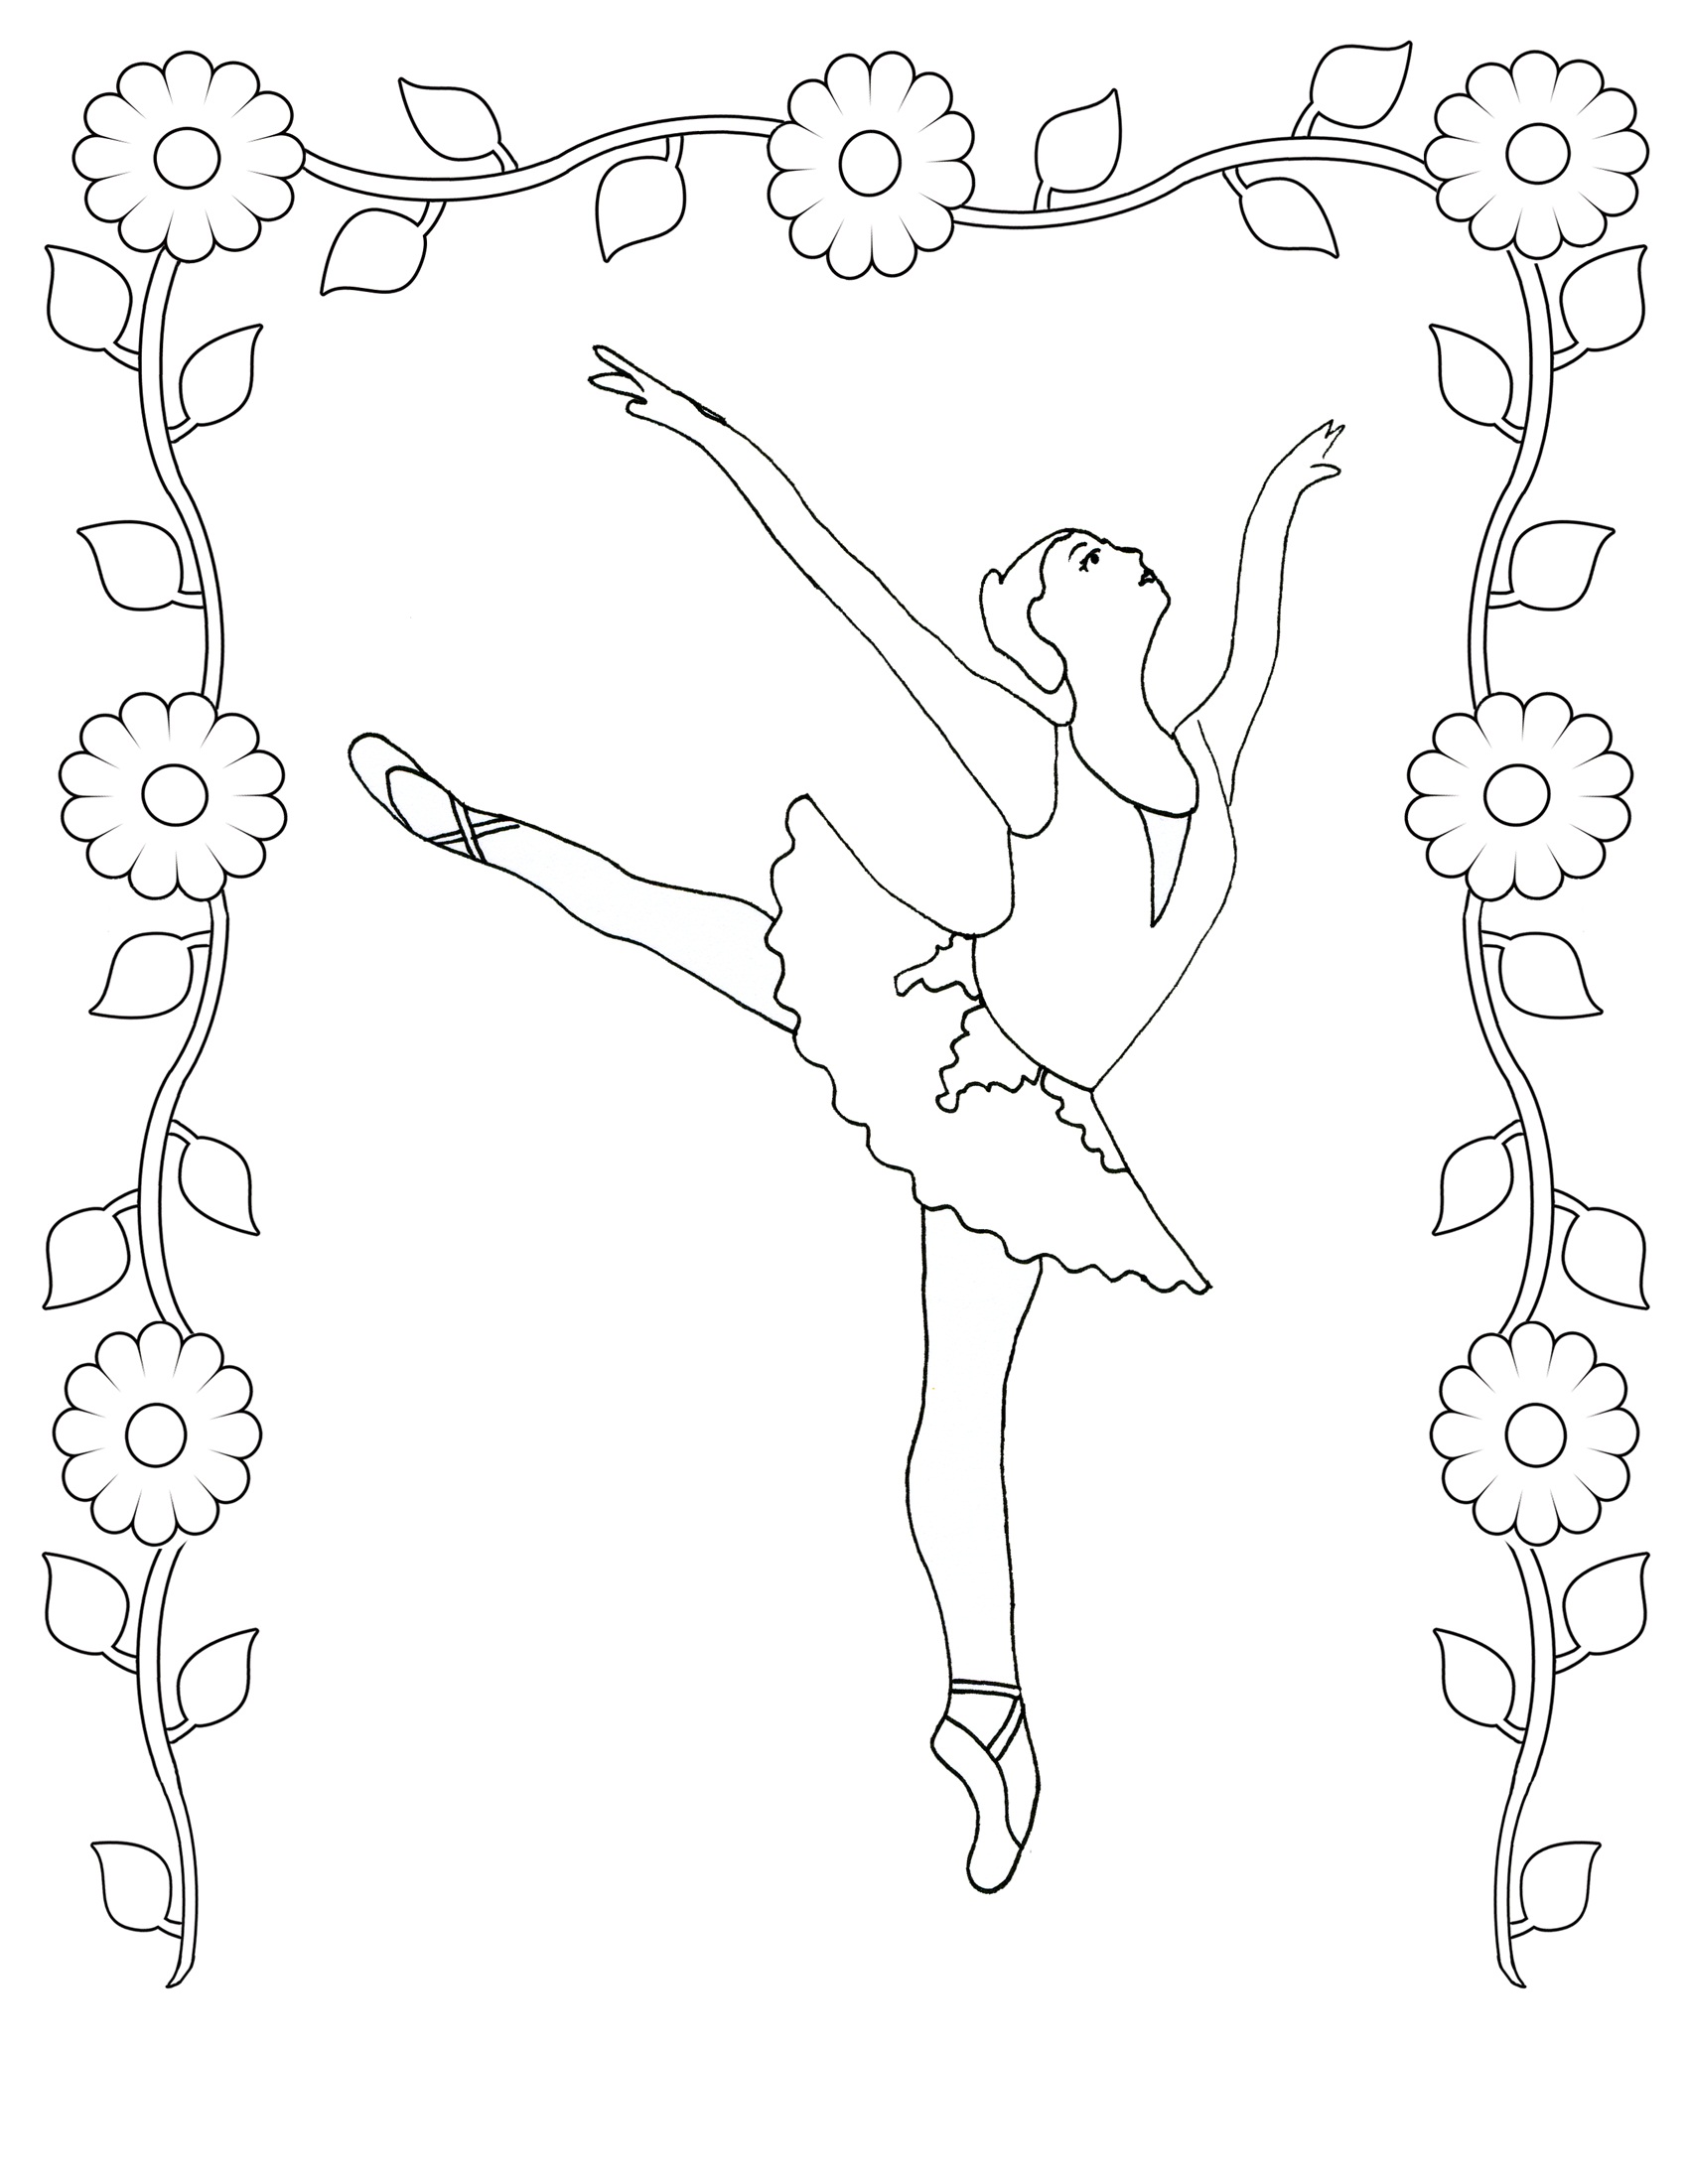 Free Printable Ballet Coloring Pages For Kids HD Wallpapers Download Free Images Wallpaper [wallpaper896.blogspot.com]